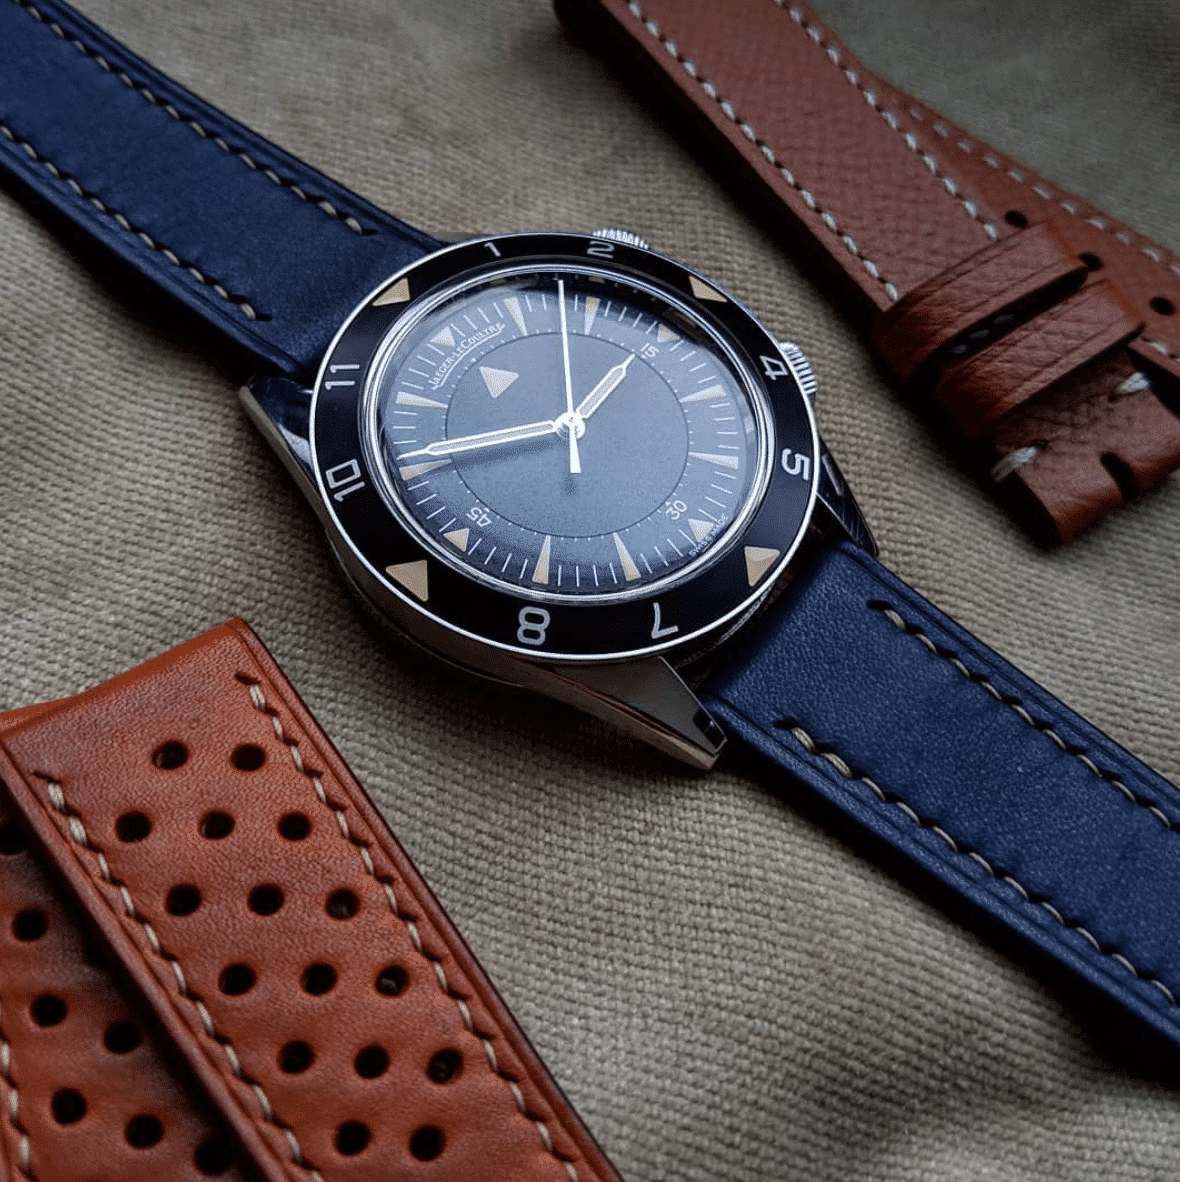 French Calfskin Watch Strap - Navy Blue - The Strap Tailor